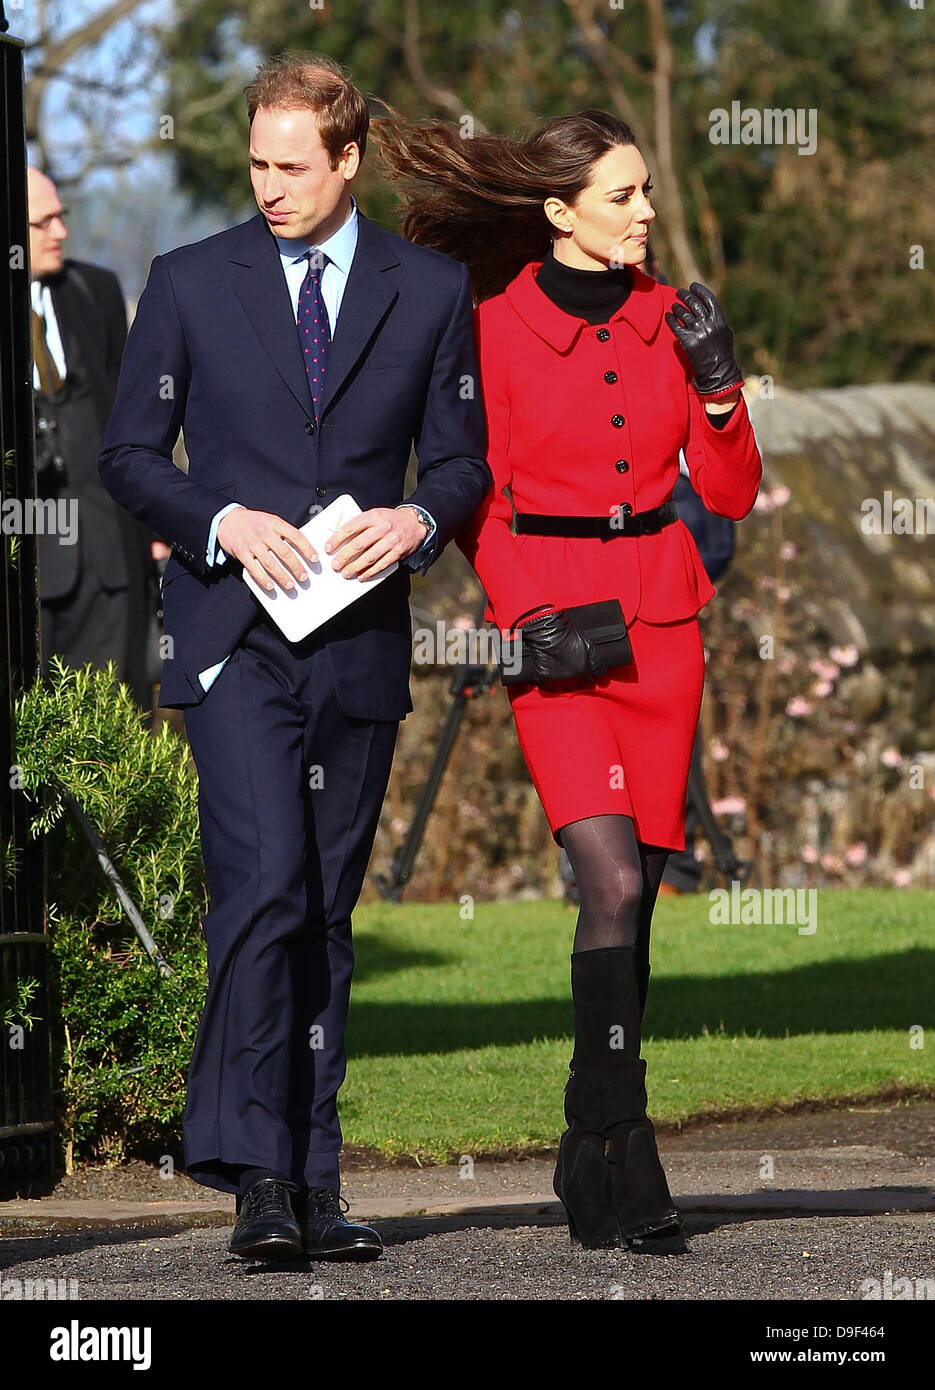 Prince William and Kate Middleton return to St. Andrews university, where  they first met, to launch its 600th anniversary celebrations St. Andrews,  Scotland - 24.02.11 Stock Photo - Alamy